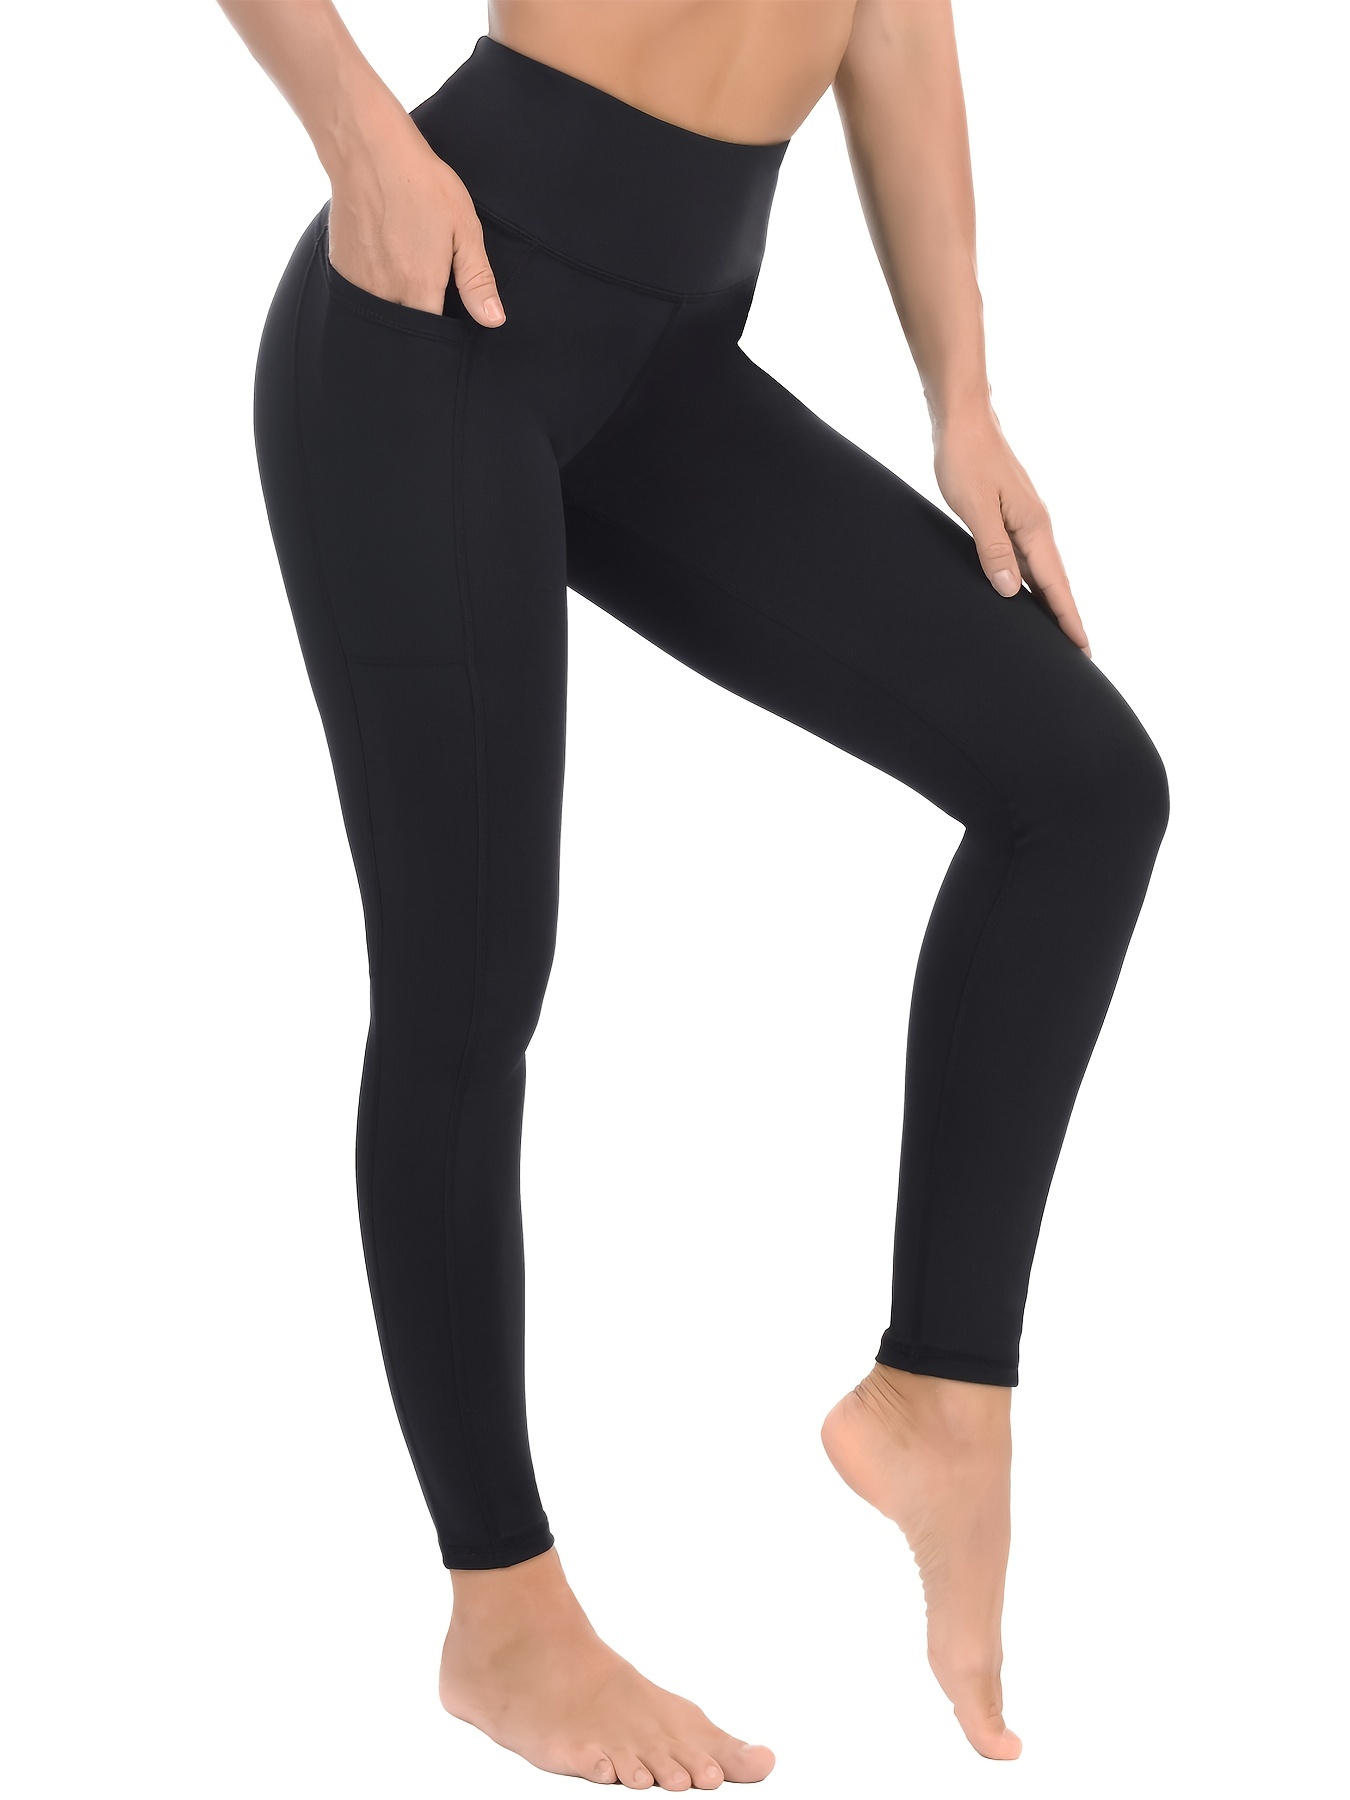 Women's High Stretch Yoga Leggings: Slim Fit, Waist-Hugging Workout Gear  for Active Lifestyles